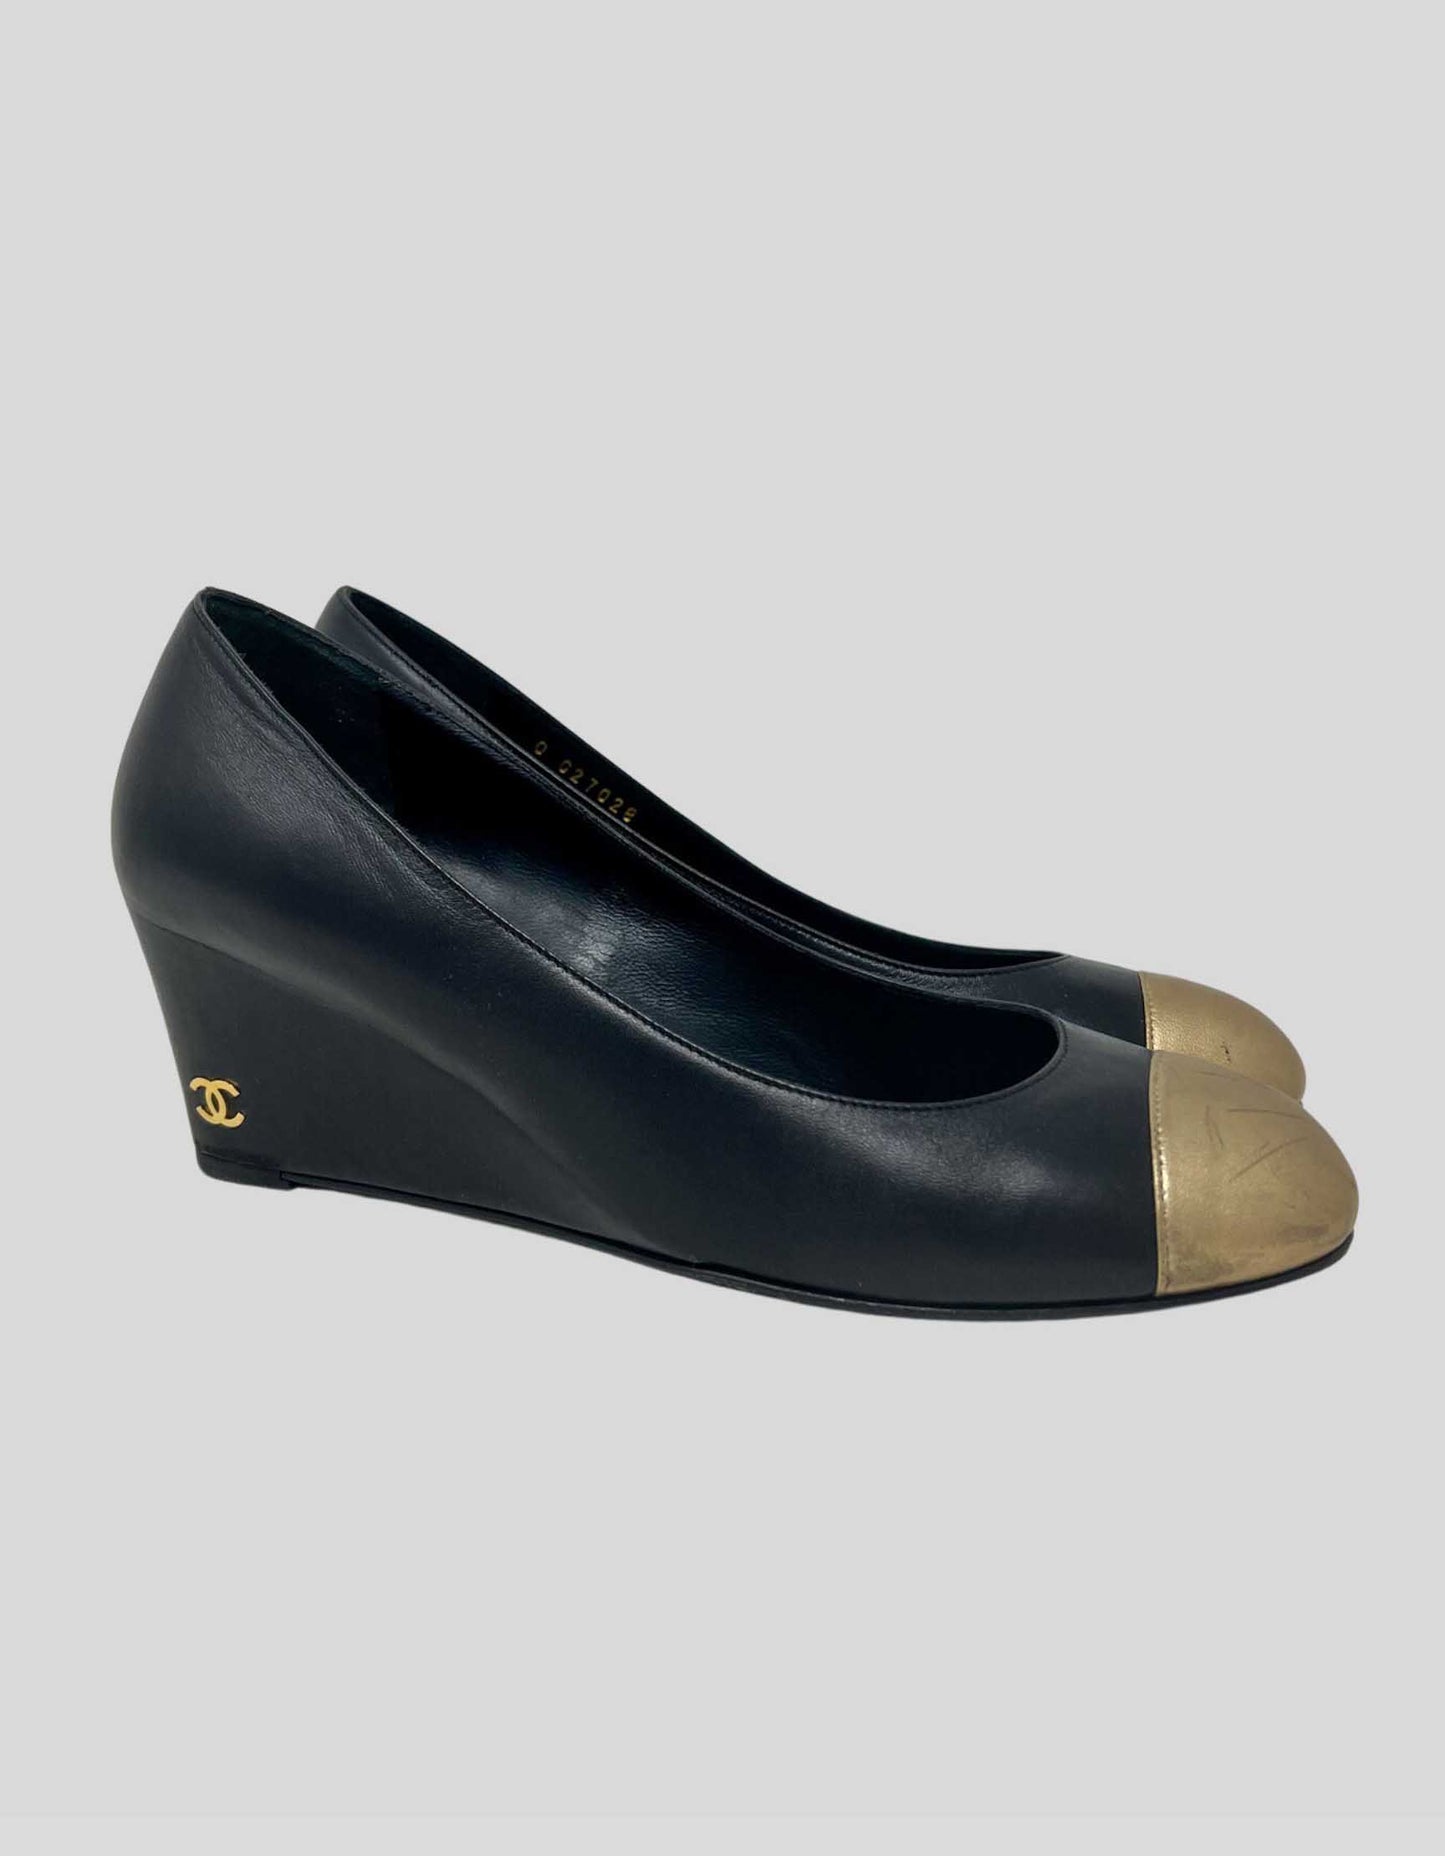 Chanel Black Wedge With Gold Tone Capped Toe With Chanel Emblem - 39 IT | 9 US